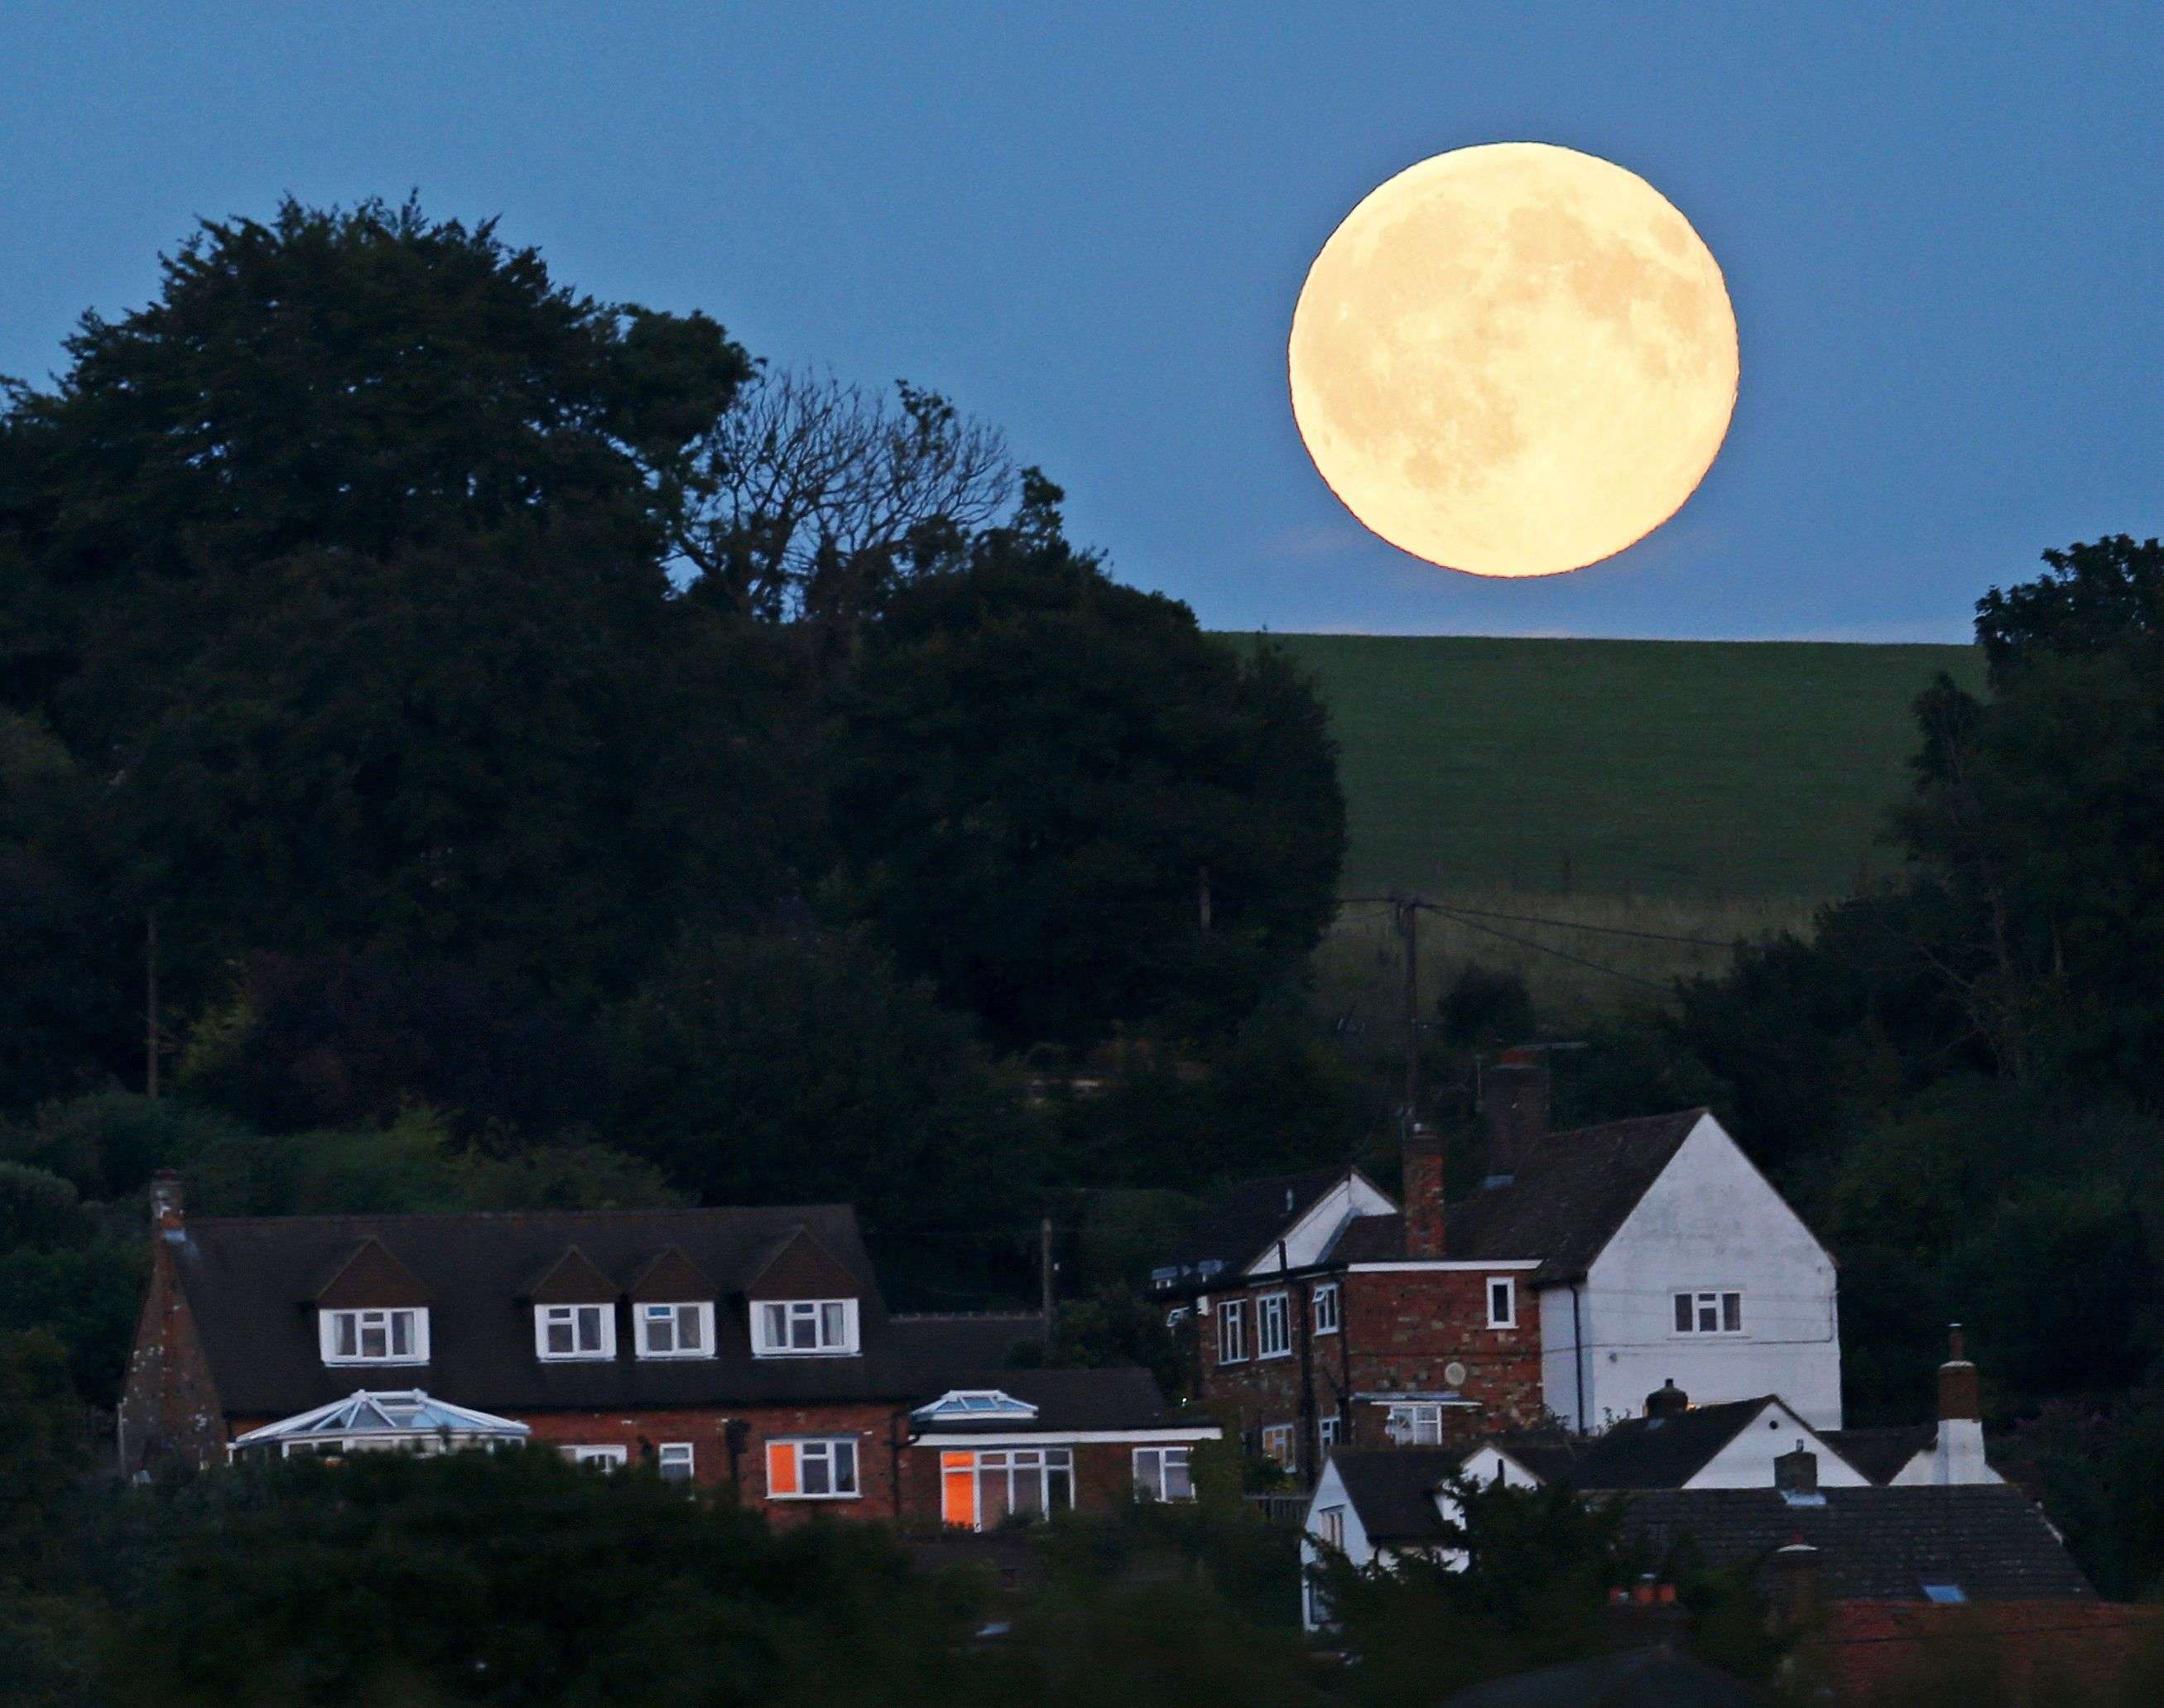 A full moon, known as the Blue Moon is seen over Loosely Row, near Princes Risborough, southeast England, July 31, 2015. REUTERS/Eddie Keogh